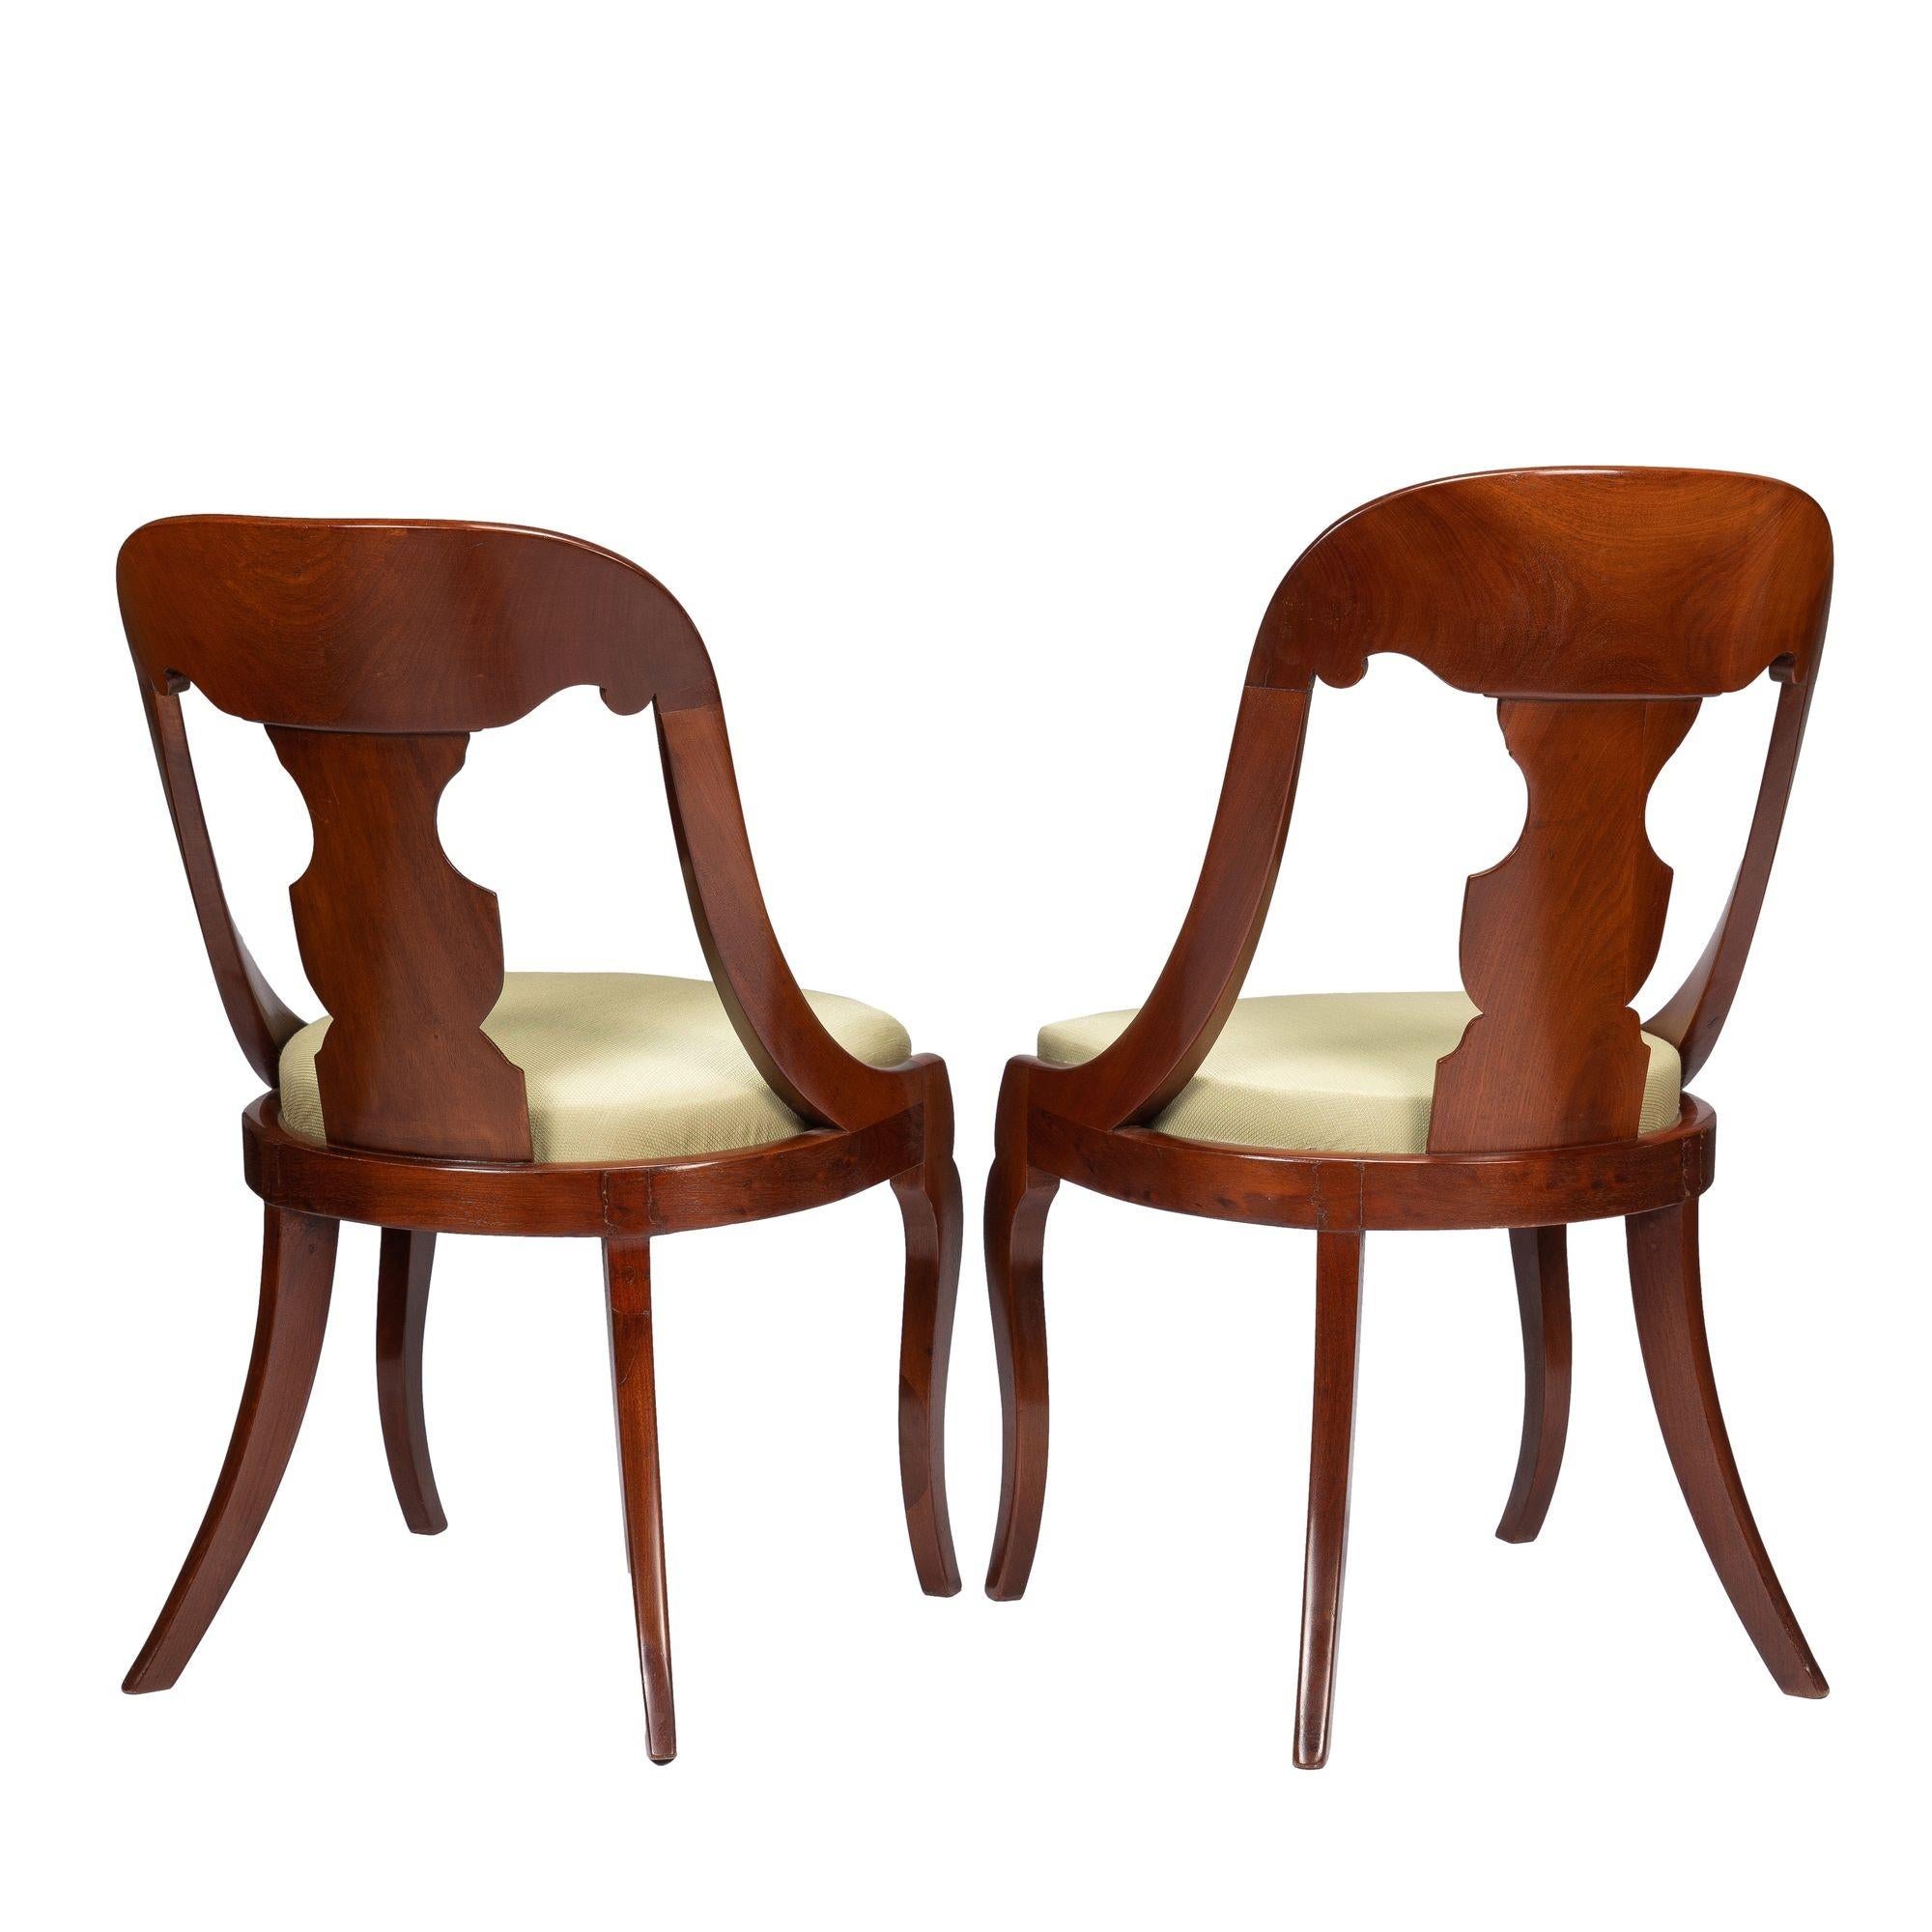 Pair of American Mahogany Gondola Chairs, 1815-35 For Sale 4